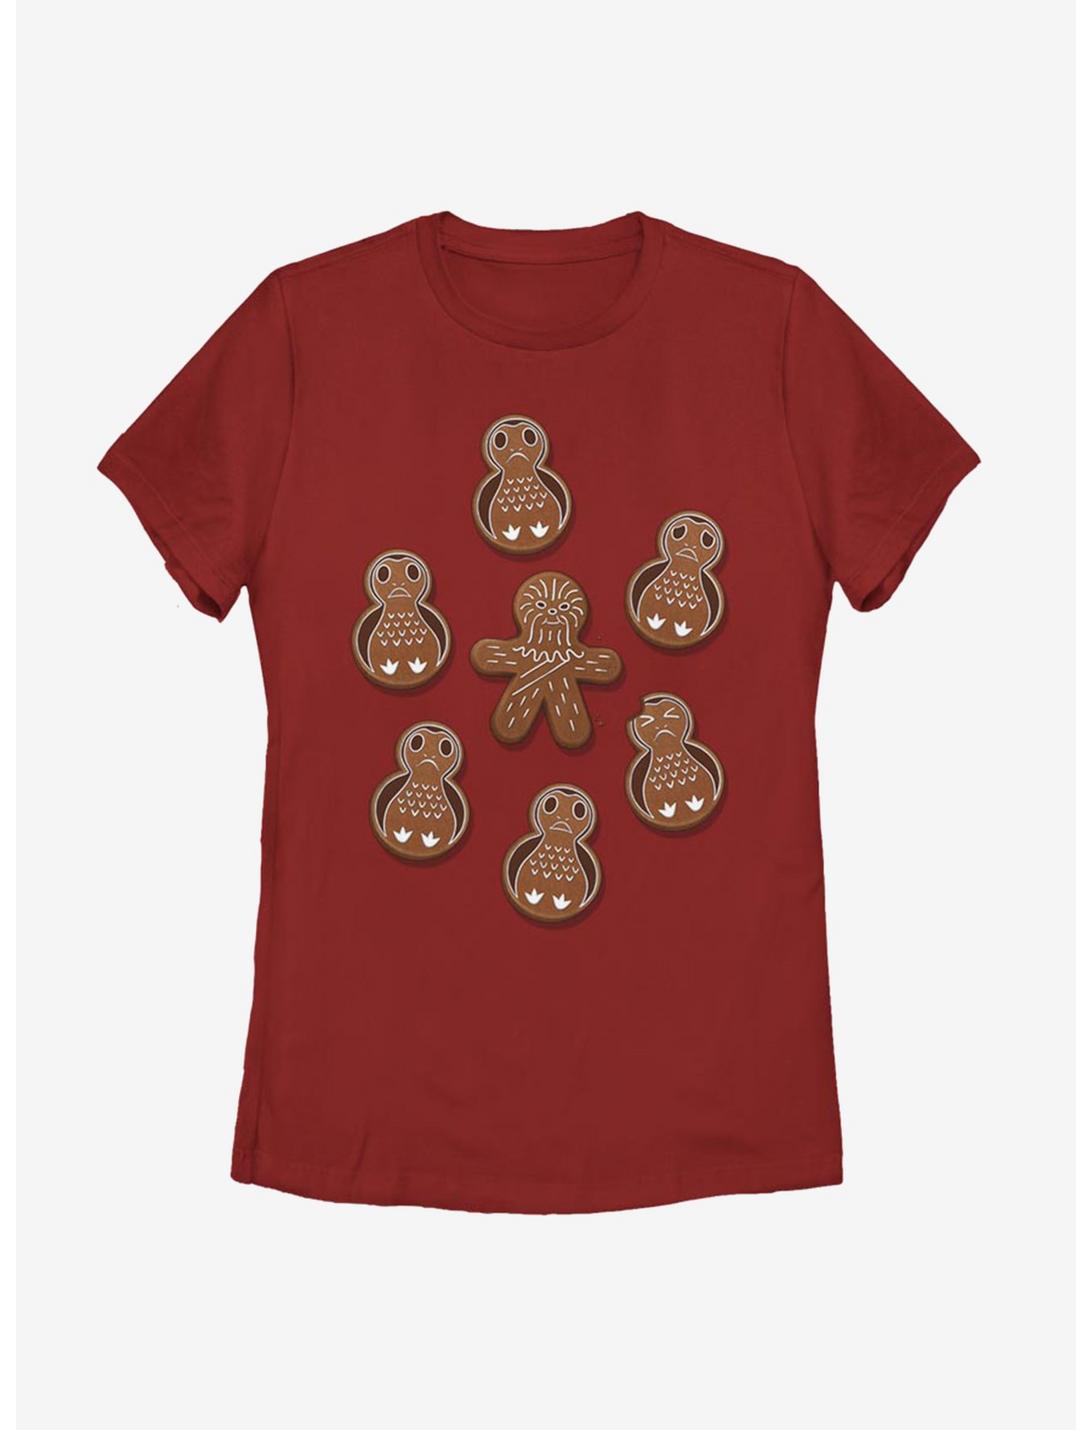 Star Wars Porg Chewie Holiday Cookies Womens T-Shirt, RED, hi-res